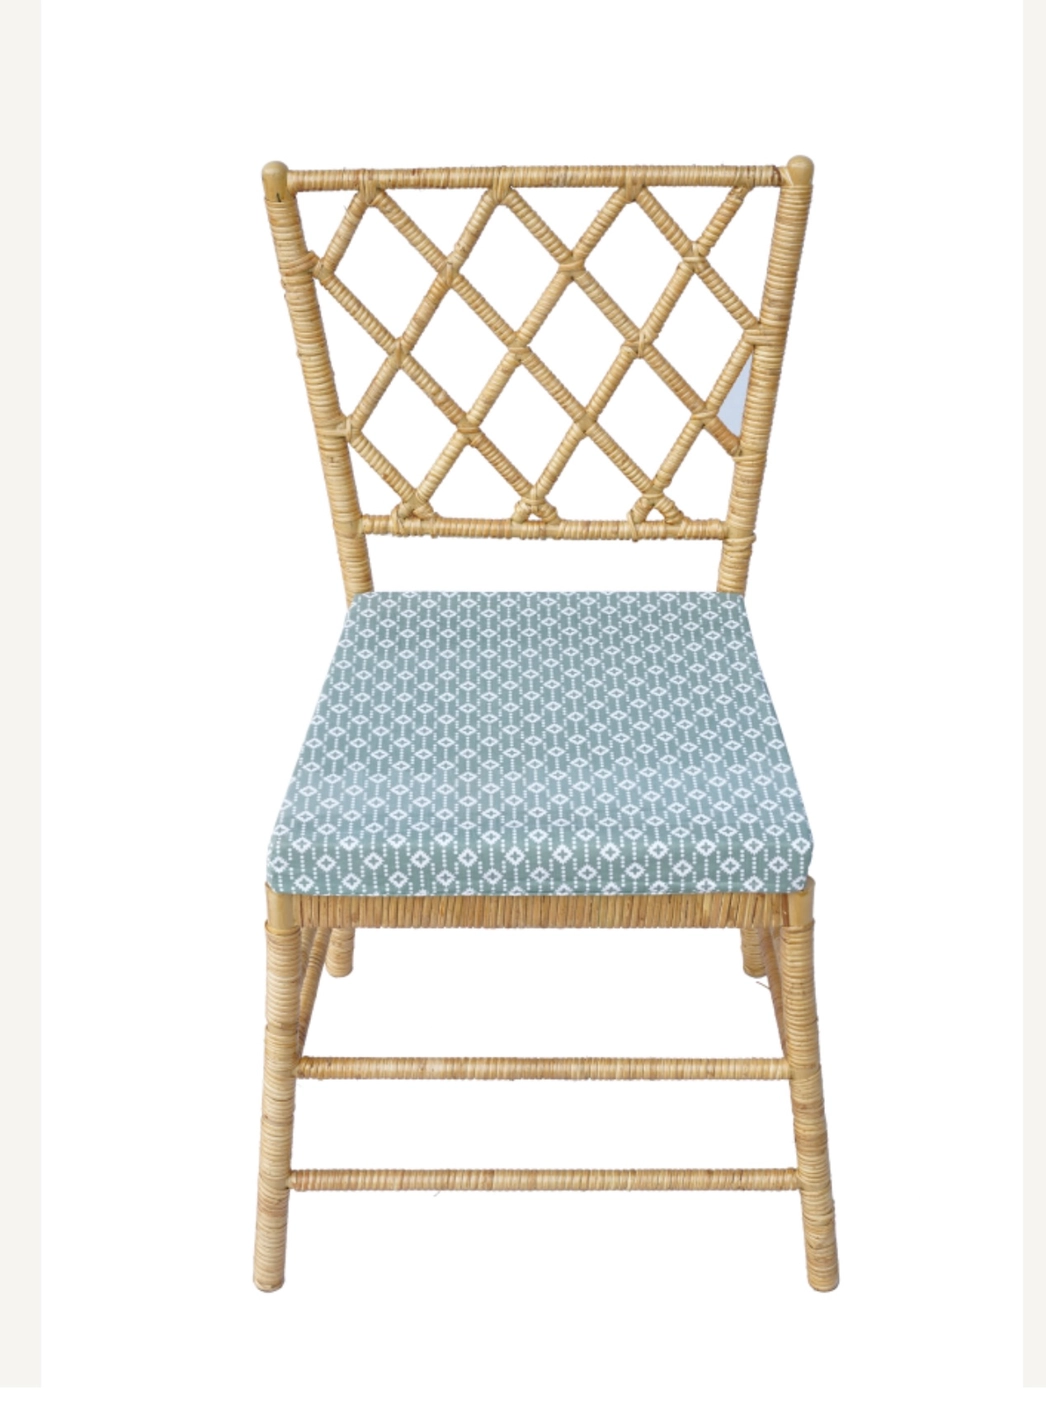 Stacking Wicker Chairs